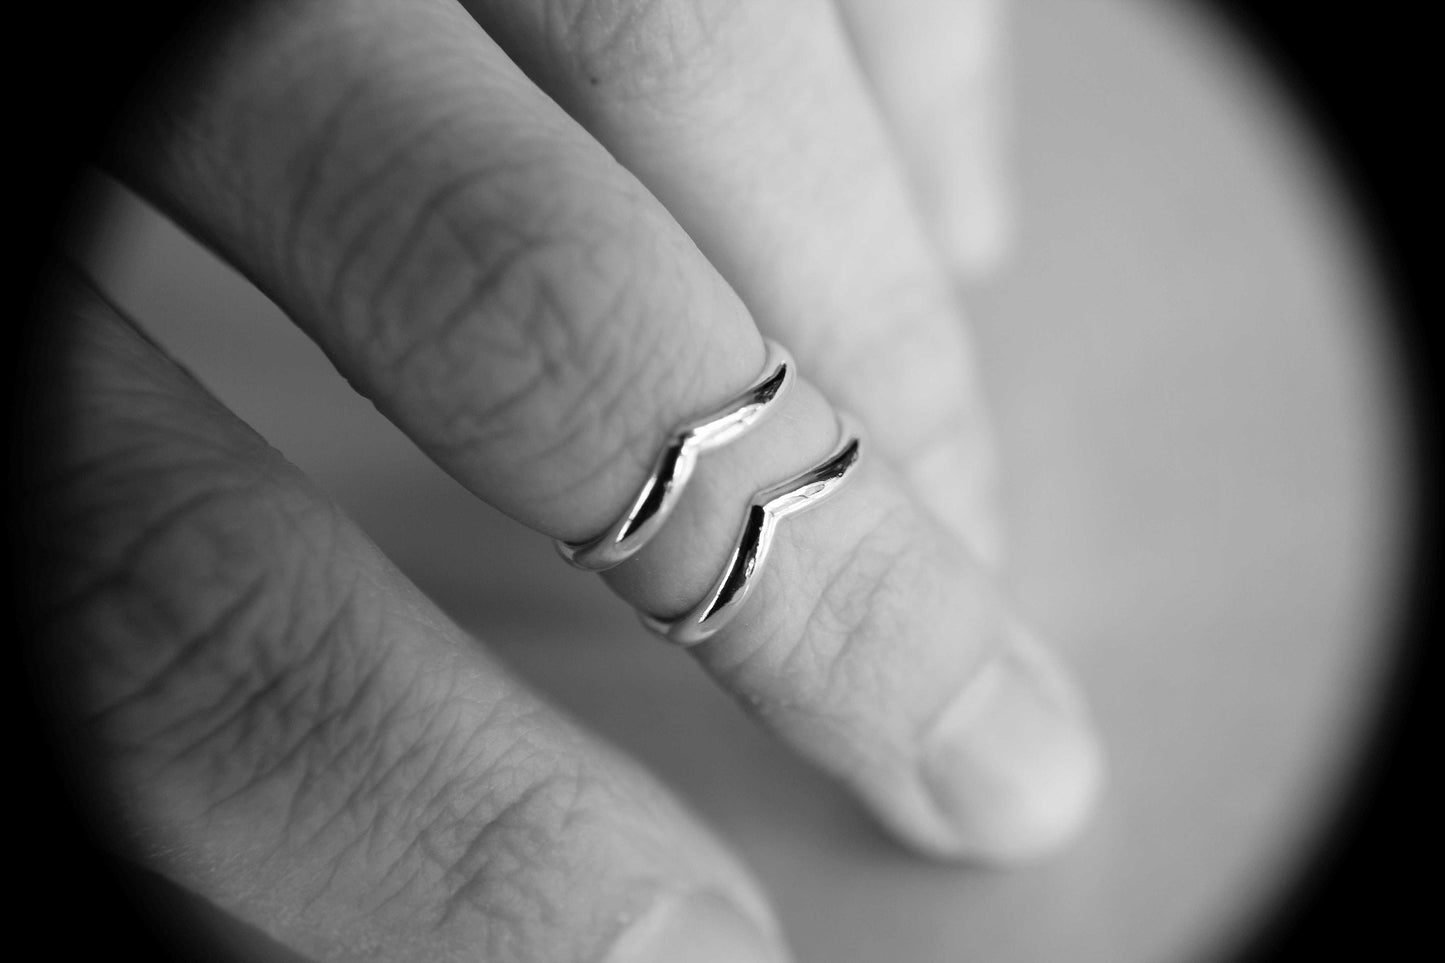 Sterling Silver Double Chevron Ring Set, Knuckle Rings, Sterling Knuckle Rings, Stacking Rings, above knuckle ring, Rings, Chevron Rings